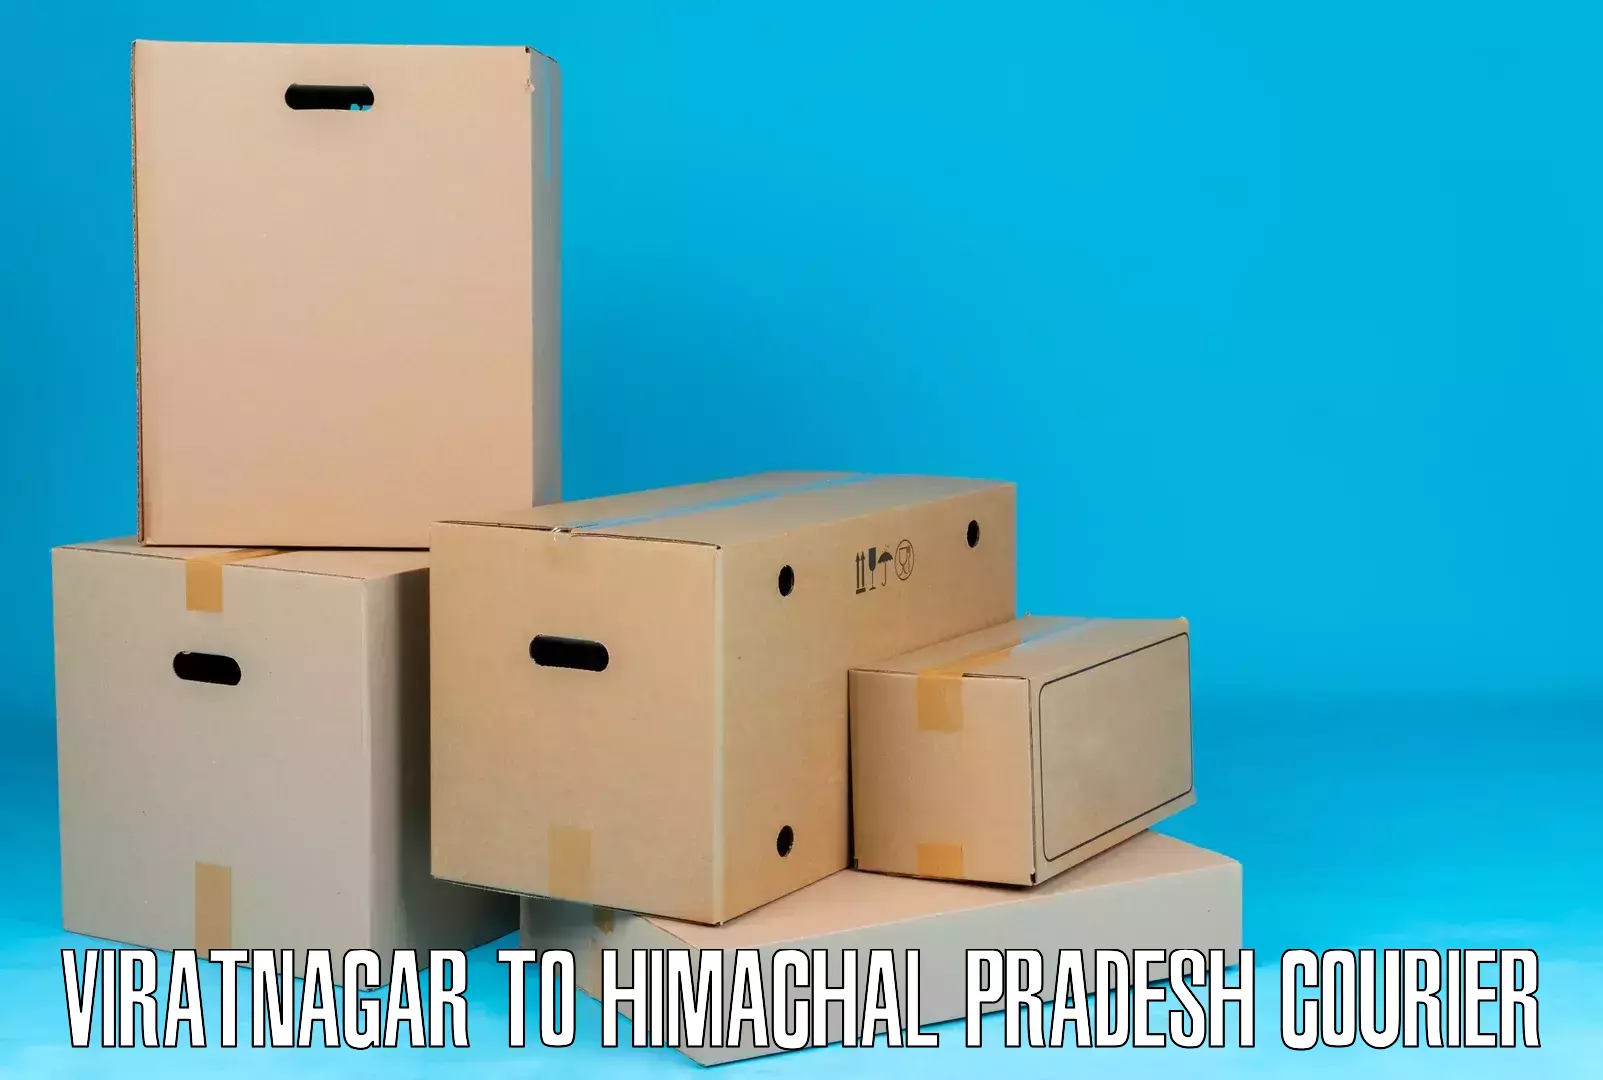 Budget-friendly shipping Viratnagar to YS Parmar University of Horticulture and Forestry Solan